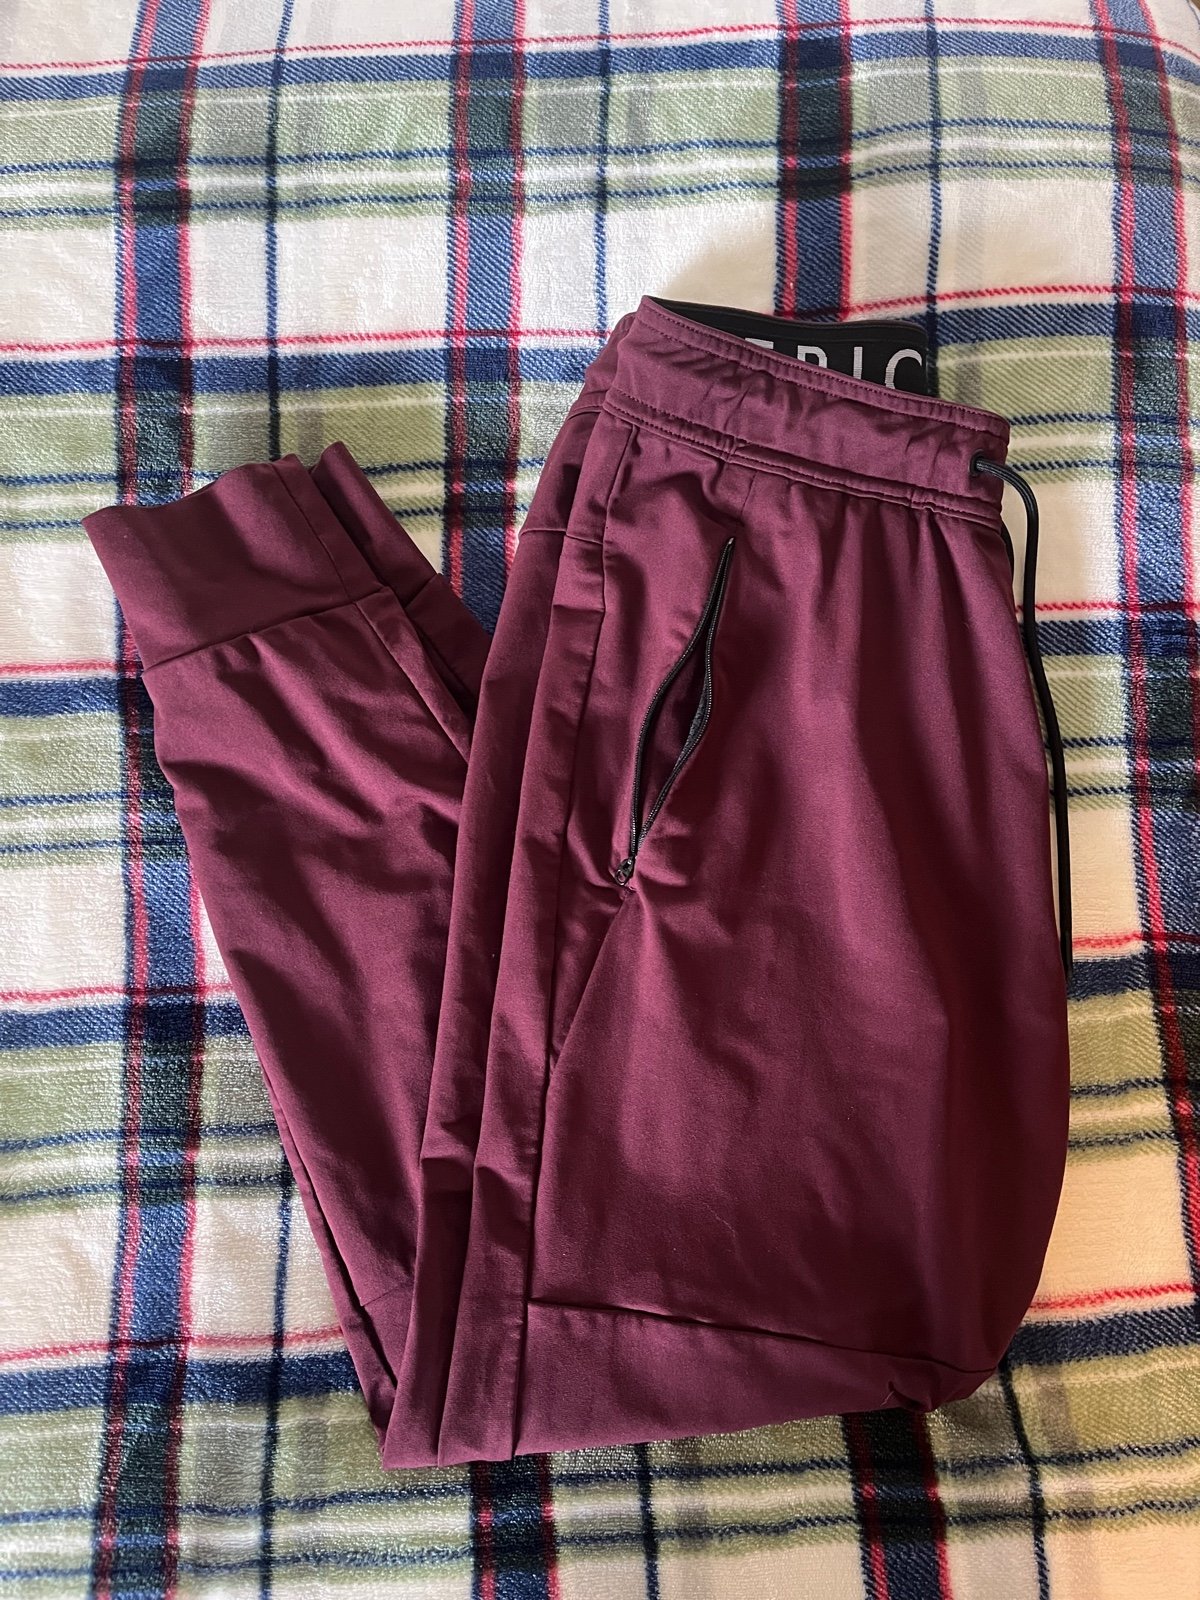 Simple AMERICAN EAGLE Joggers (Burgundy) (Size Small) M